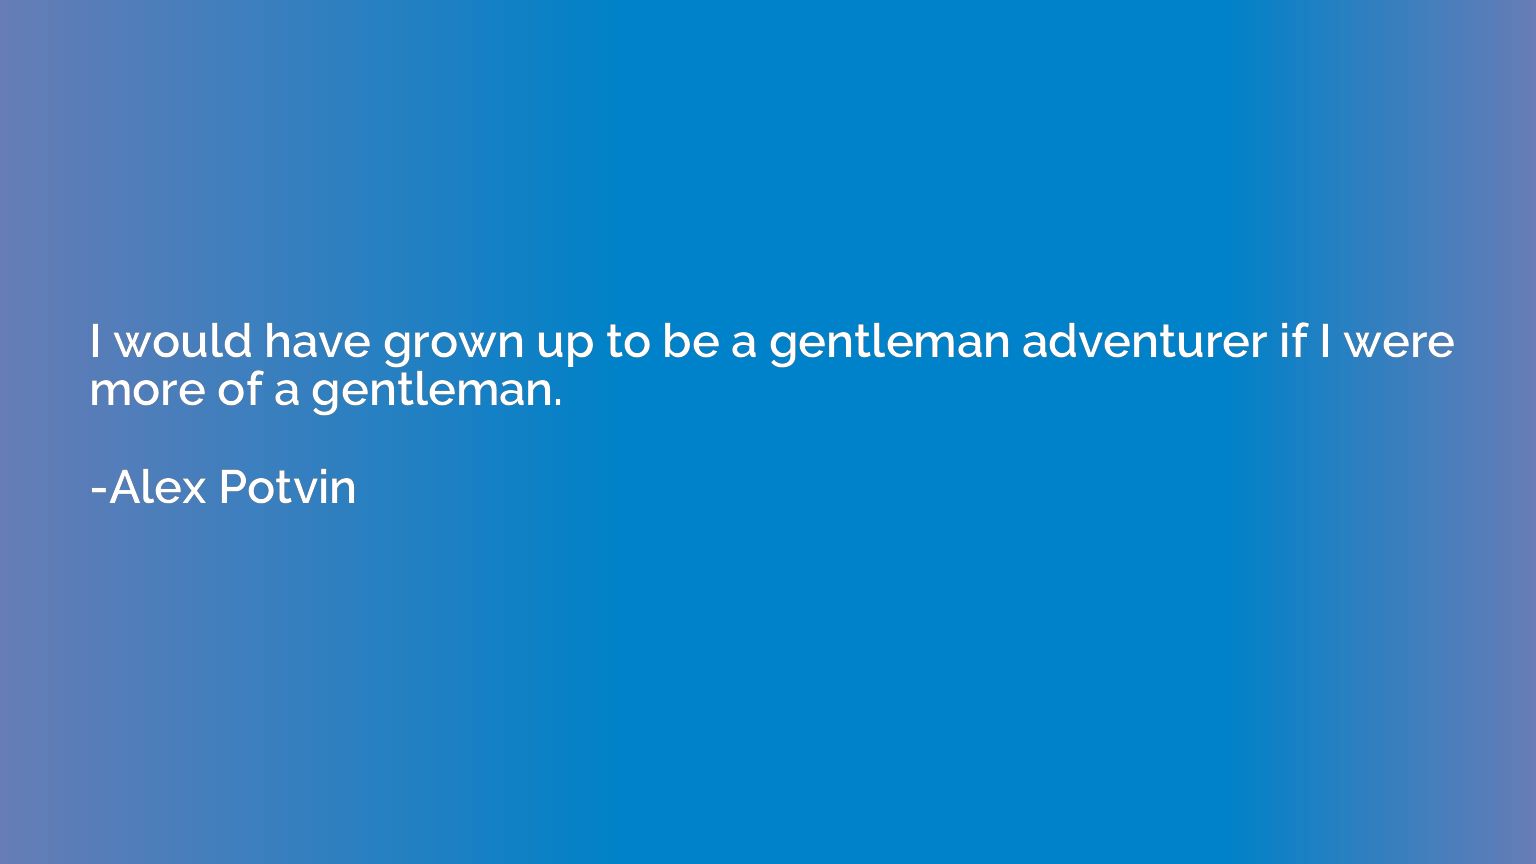 I would have grown up to be a gentleman adventurer if I were